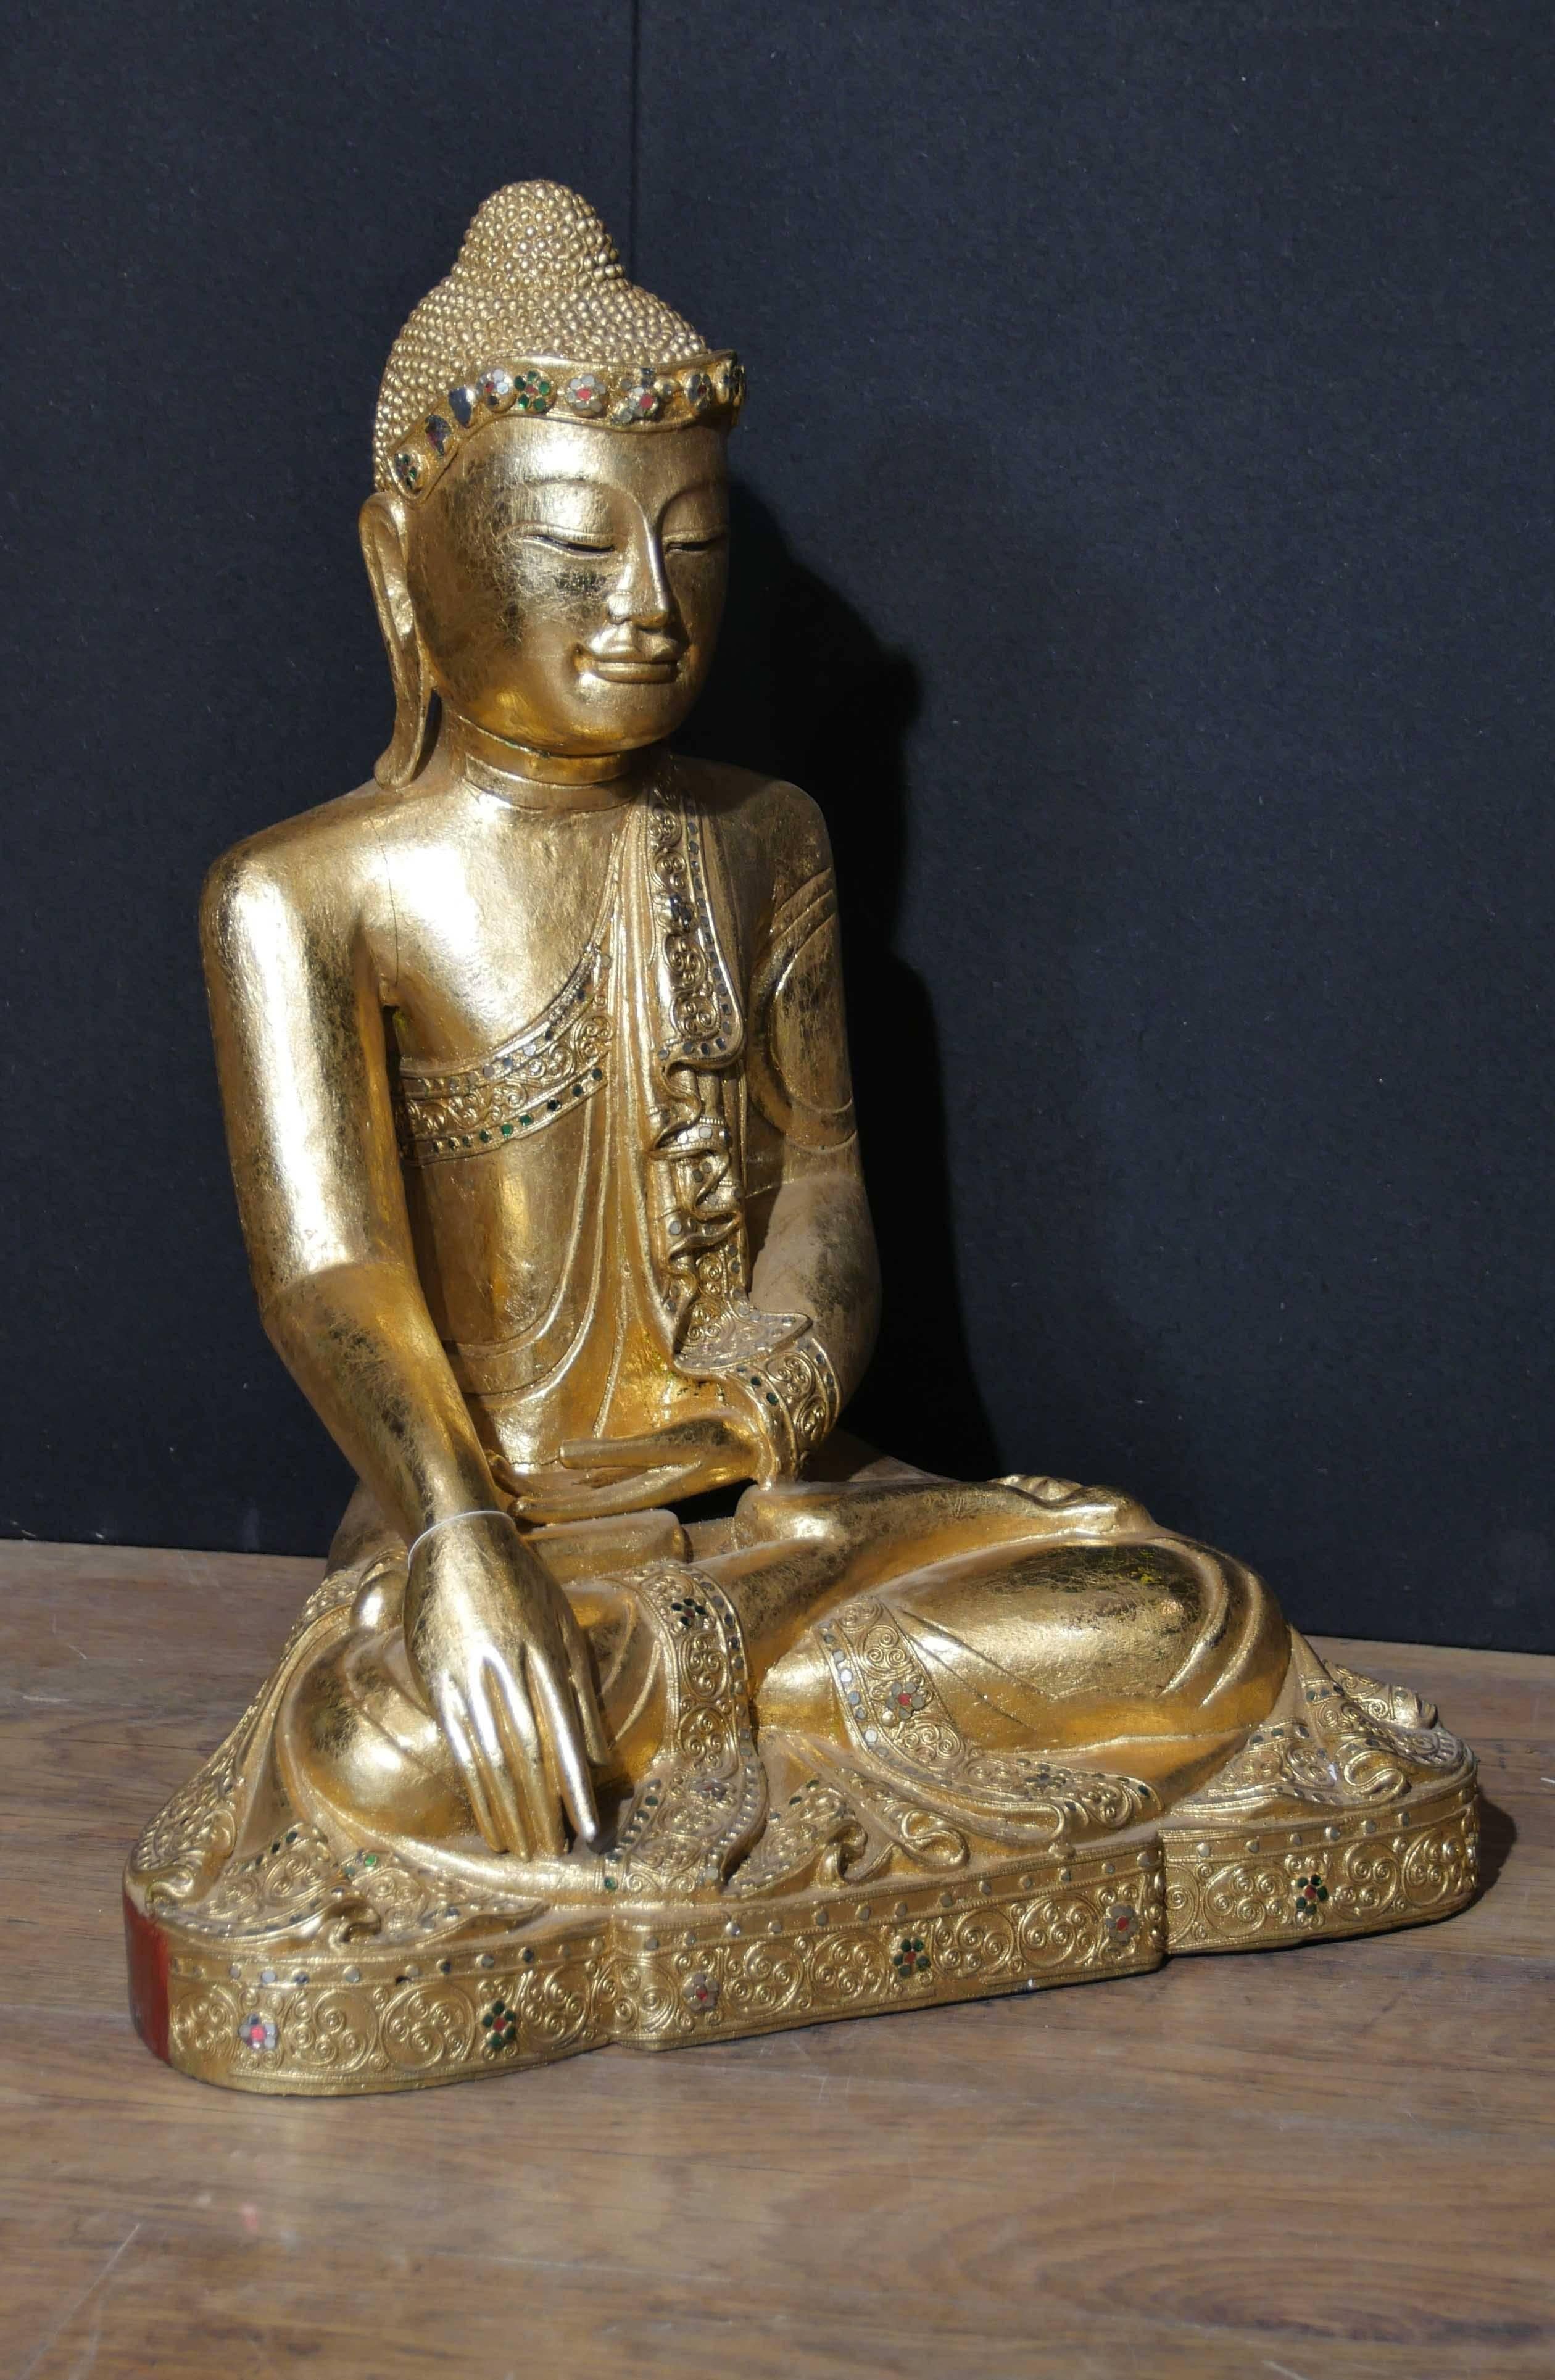 Wonderful antique Burmese Buddha statue in giltwood.
Classic meditation or Dhyanasana pose.
Piece has been hand-carved and gilded for that gold color.
Headress adorned in colored stones.
Such a charming interiors piece, every interior designers